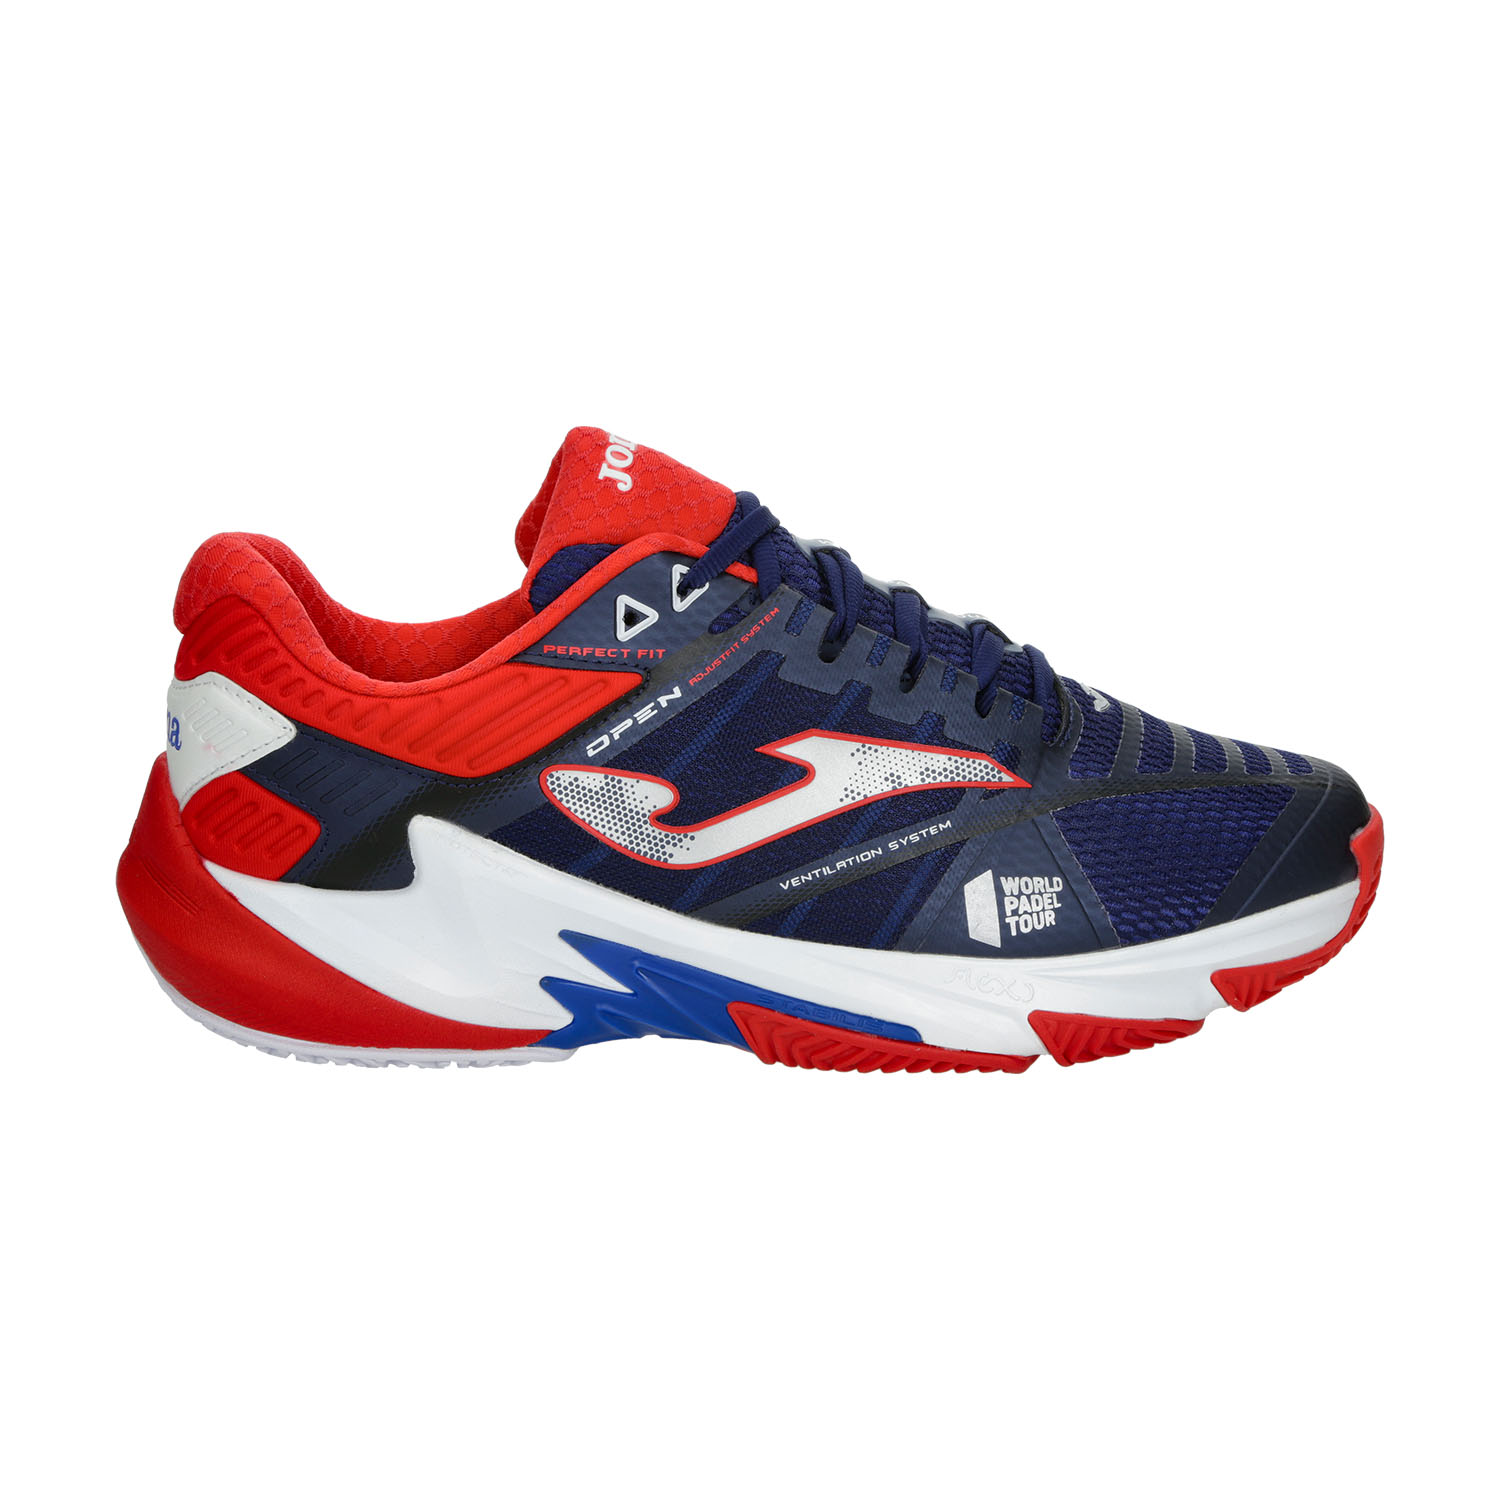 Joma Open WPT - Navy/Red